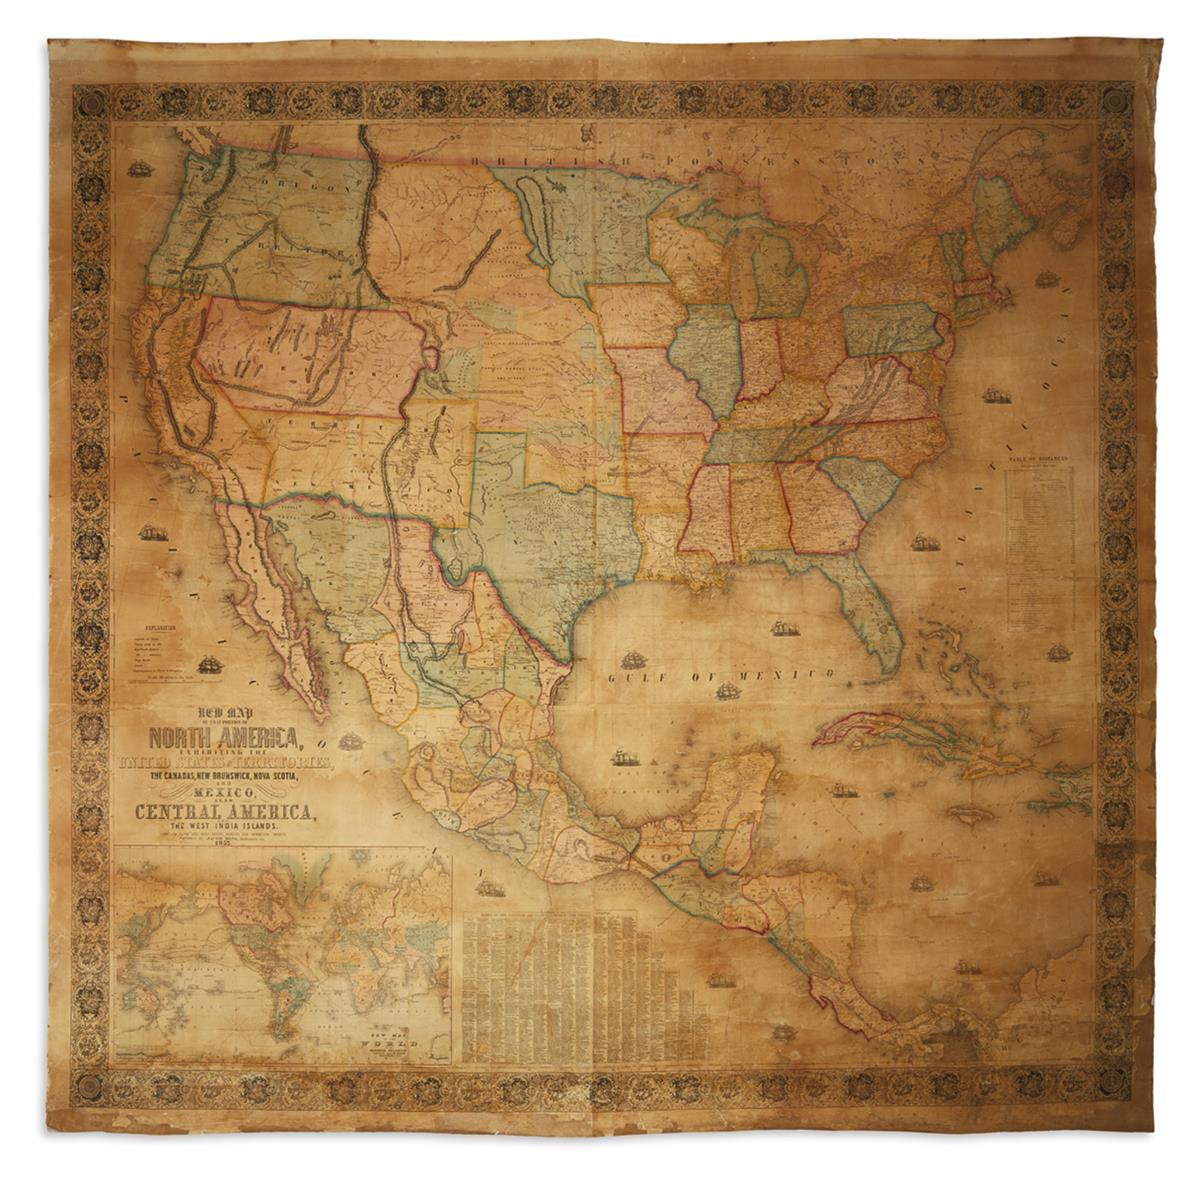 MONK, JACOB. New Map of That Portion of North America, Exhibiting the United States and Territories,